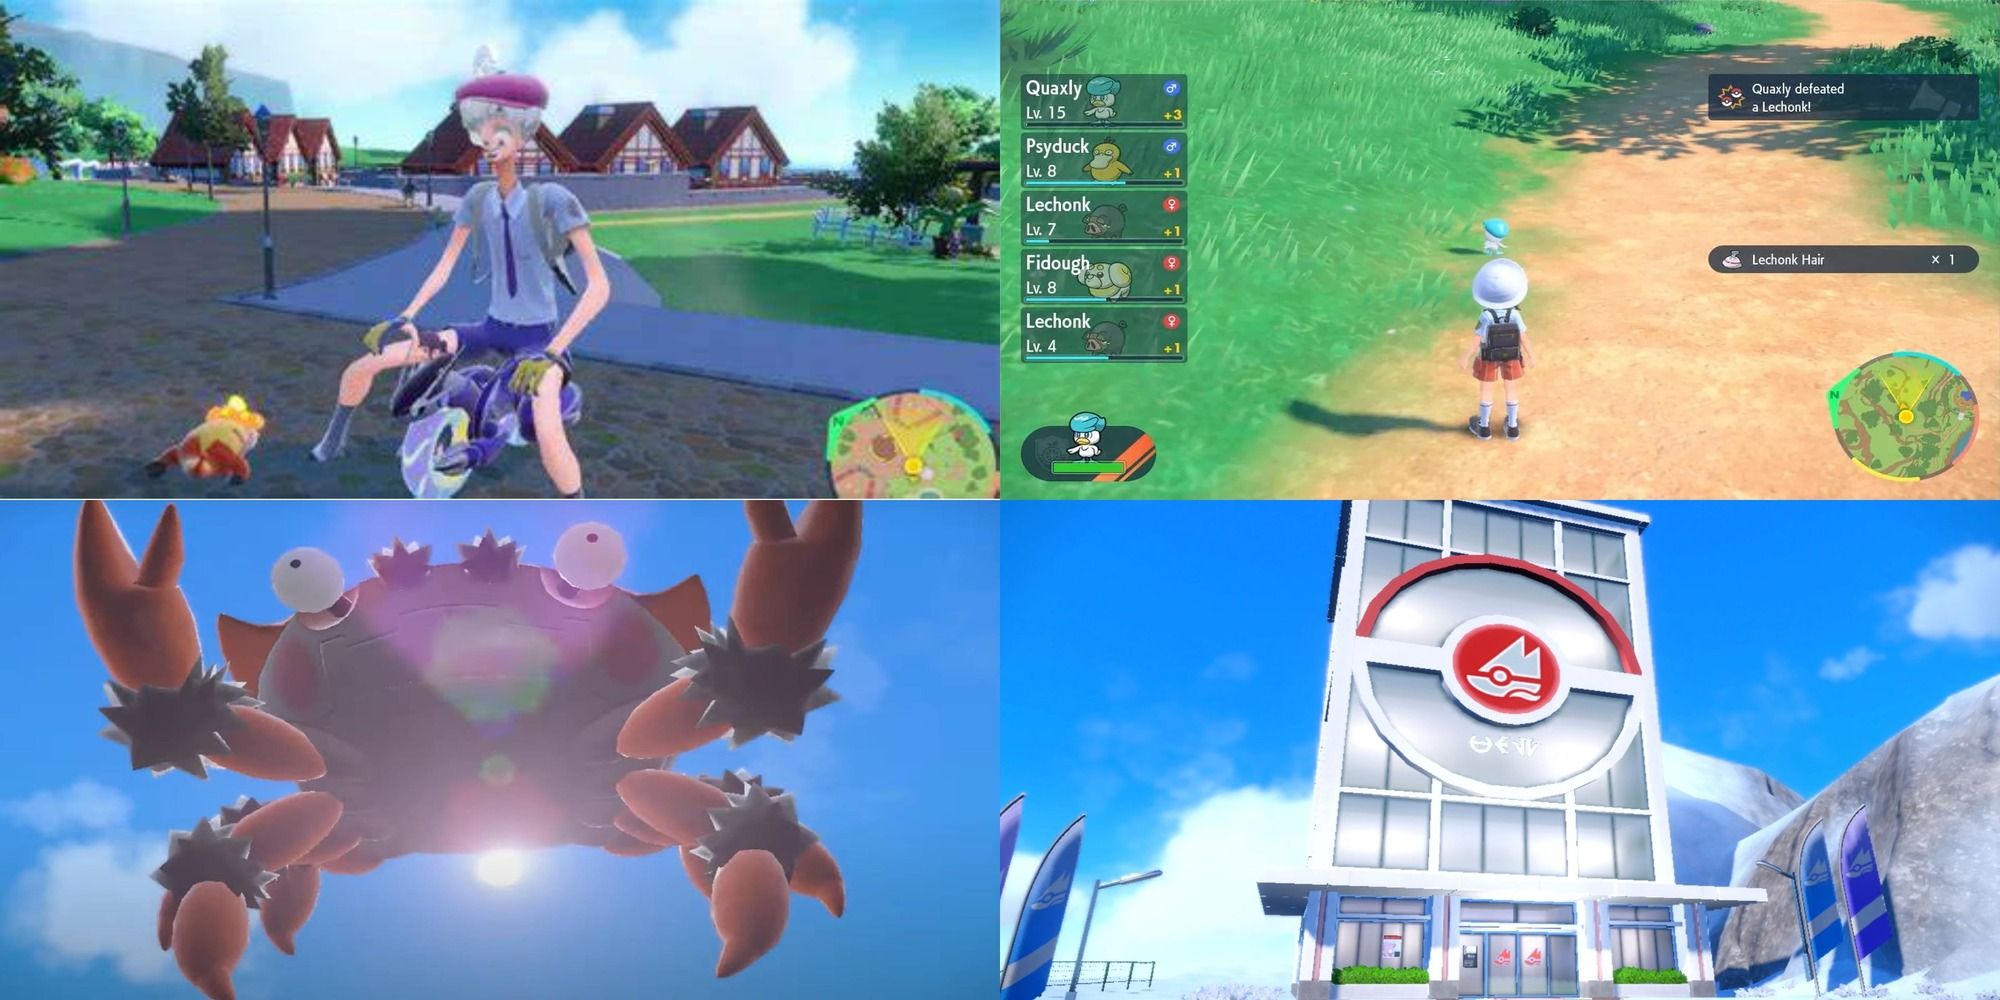 A Series Of Images Displaying The Problems With Pokemon Scarlet And Violet